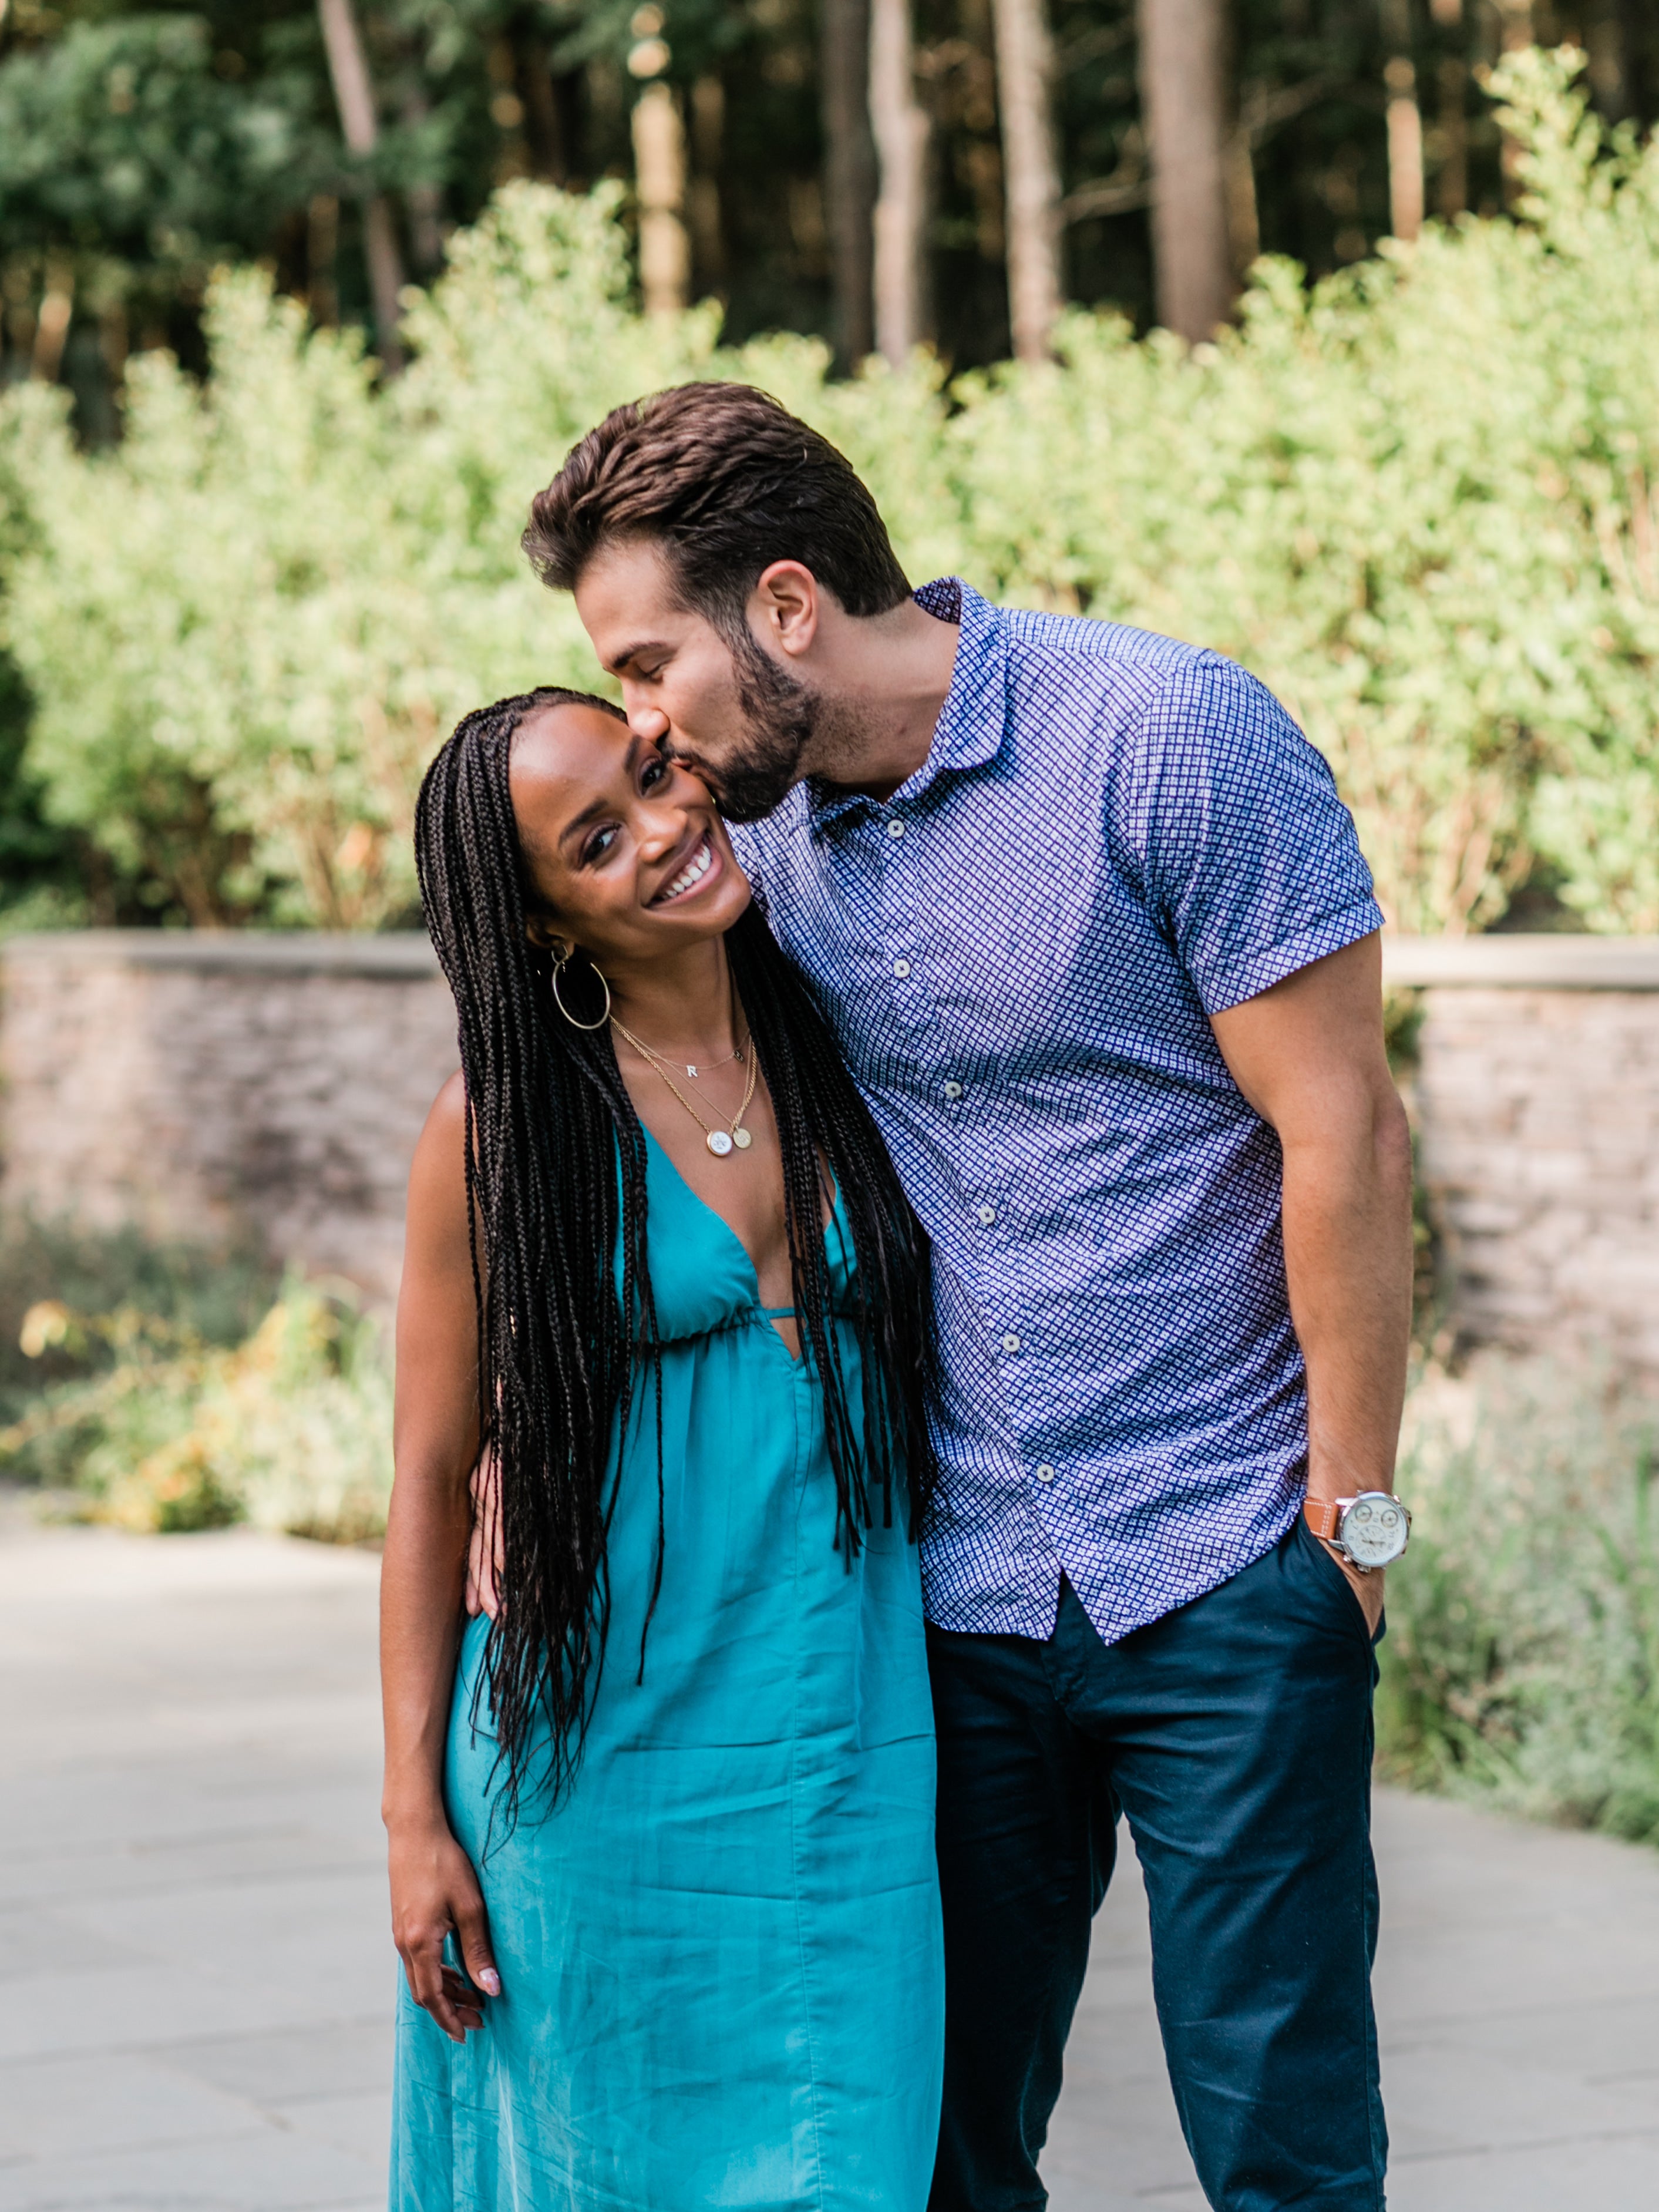 Rachel Lindsay On Getting Married, Rooting For Mike Johnson To Become The First Black ‘Bachelor’